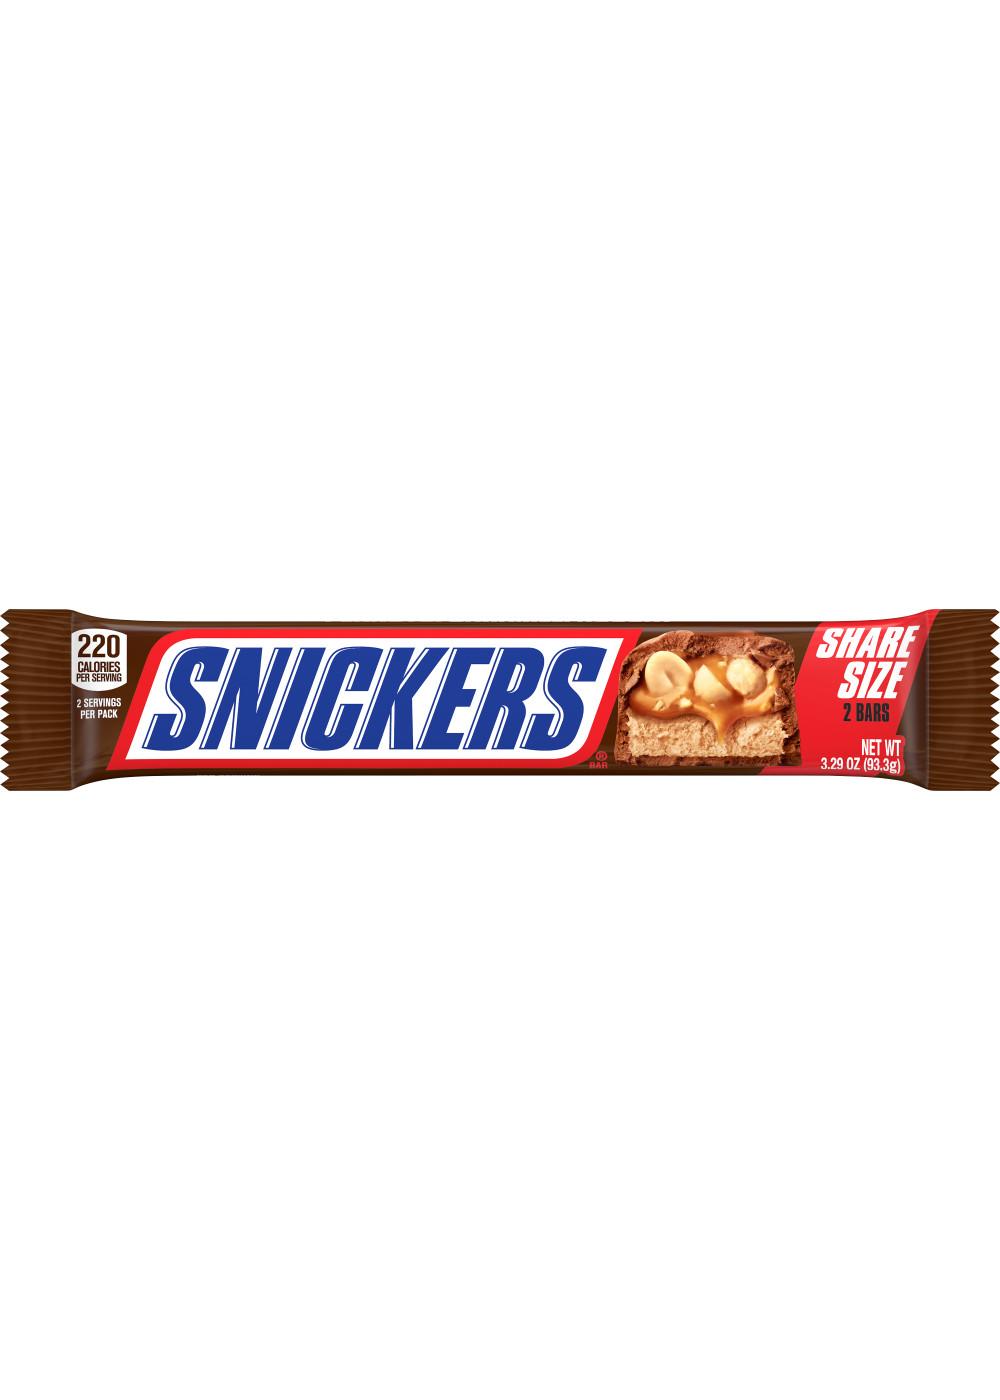 Snickers Milk Chocolate Candy Bar - Share Size; image 1 of 8